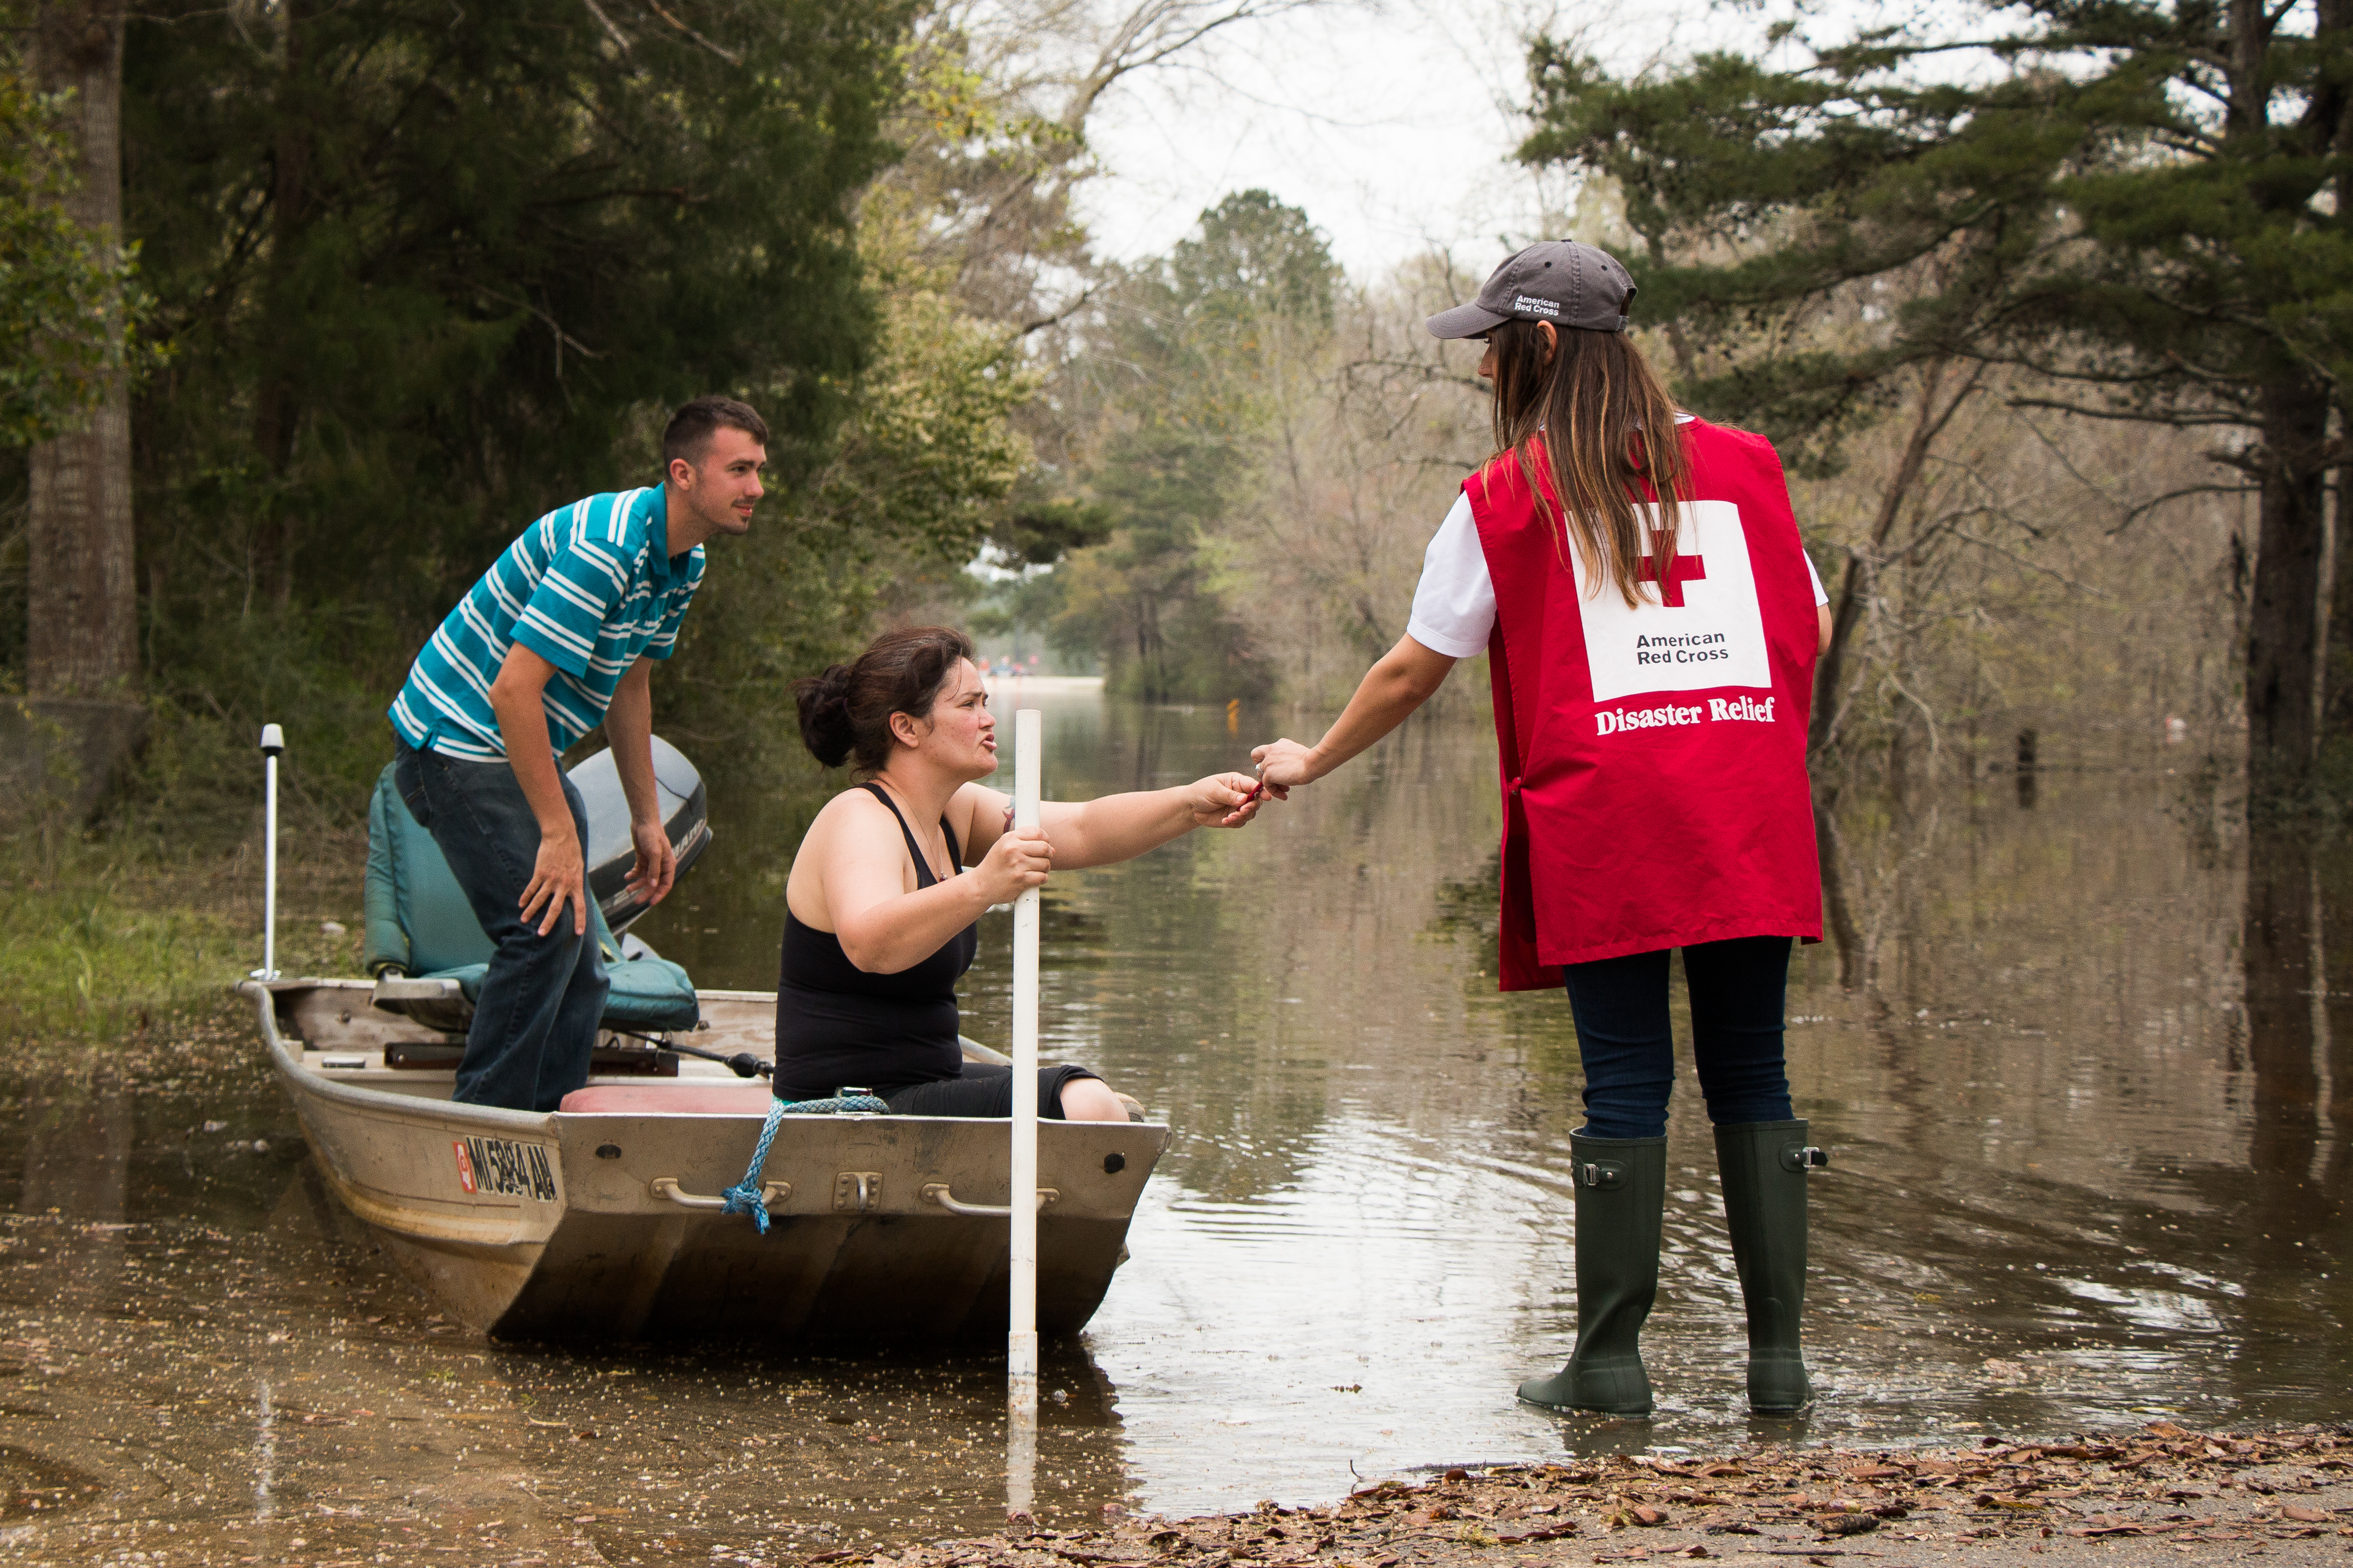 Wednesday March 16, 2016. McClain, Mississippi. Suzy Cooley and Aaron Cooley brave the flood waters on a fishing boat in McClain, MS. Red Cross volunteer, Sarah Basel, notifies them of a nearby Red Cross Point of Contact.